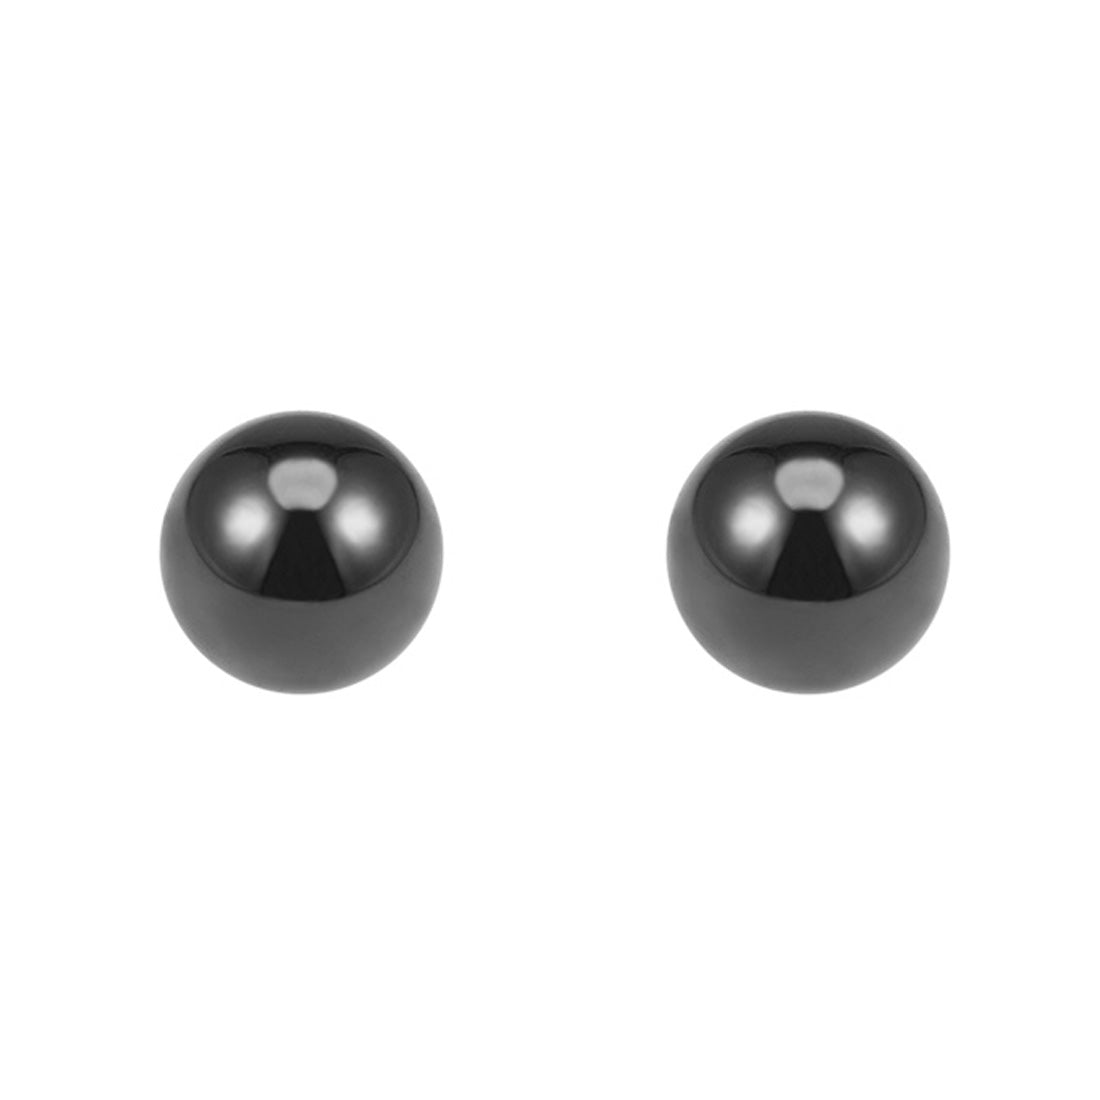 Uxcell Uxcell 5mm Ceramic Bearing Balls, Si3N4 Silicon Nitride Ball G5 Precision 4pcs